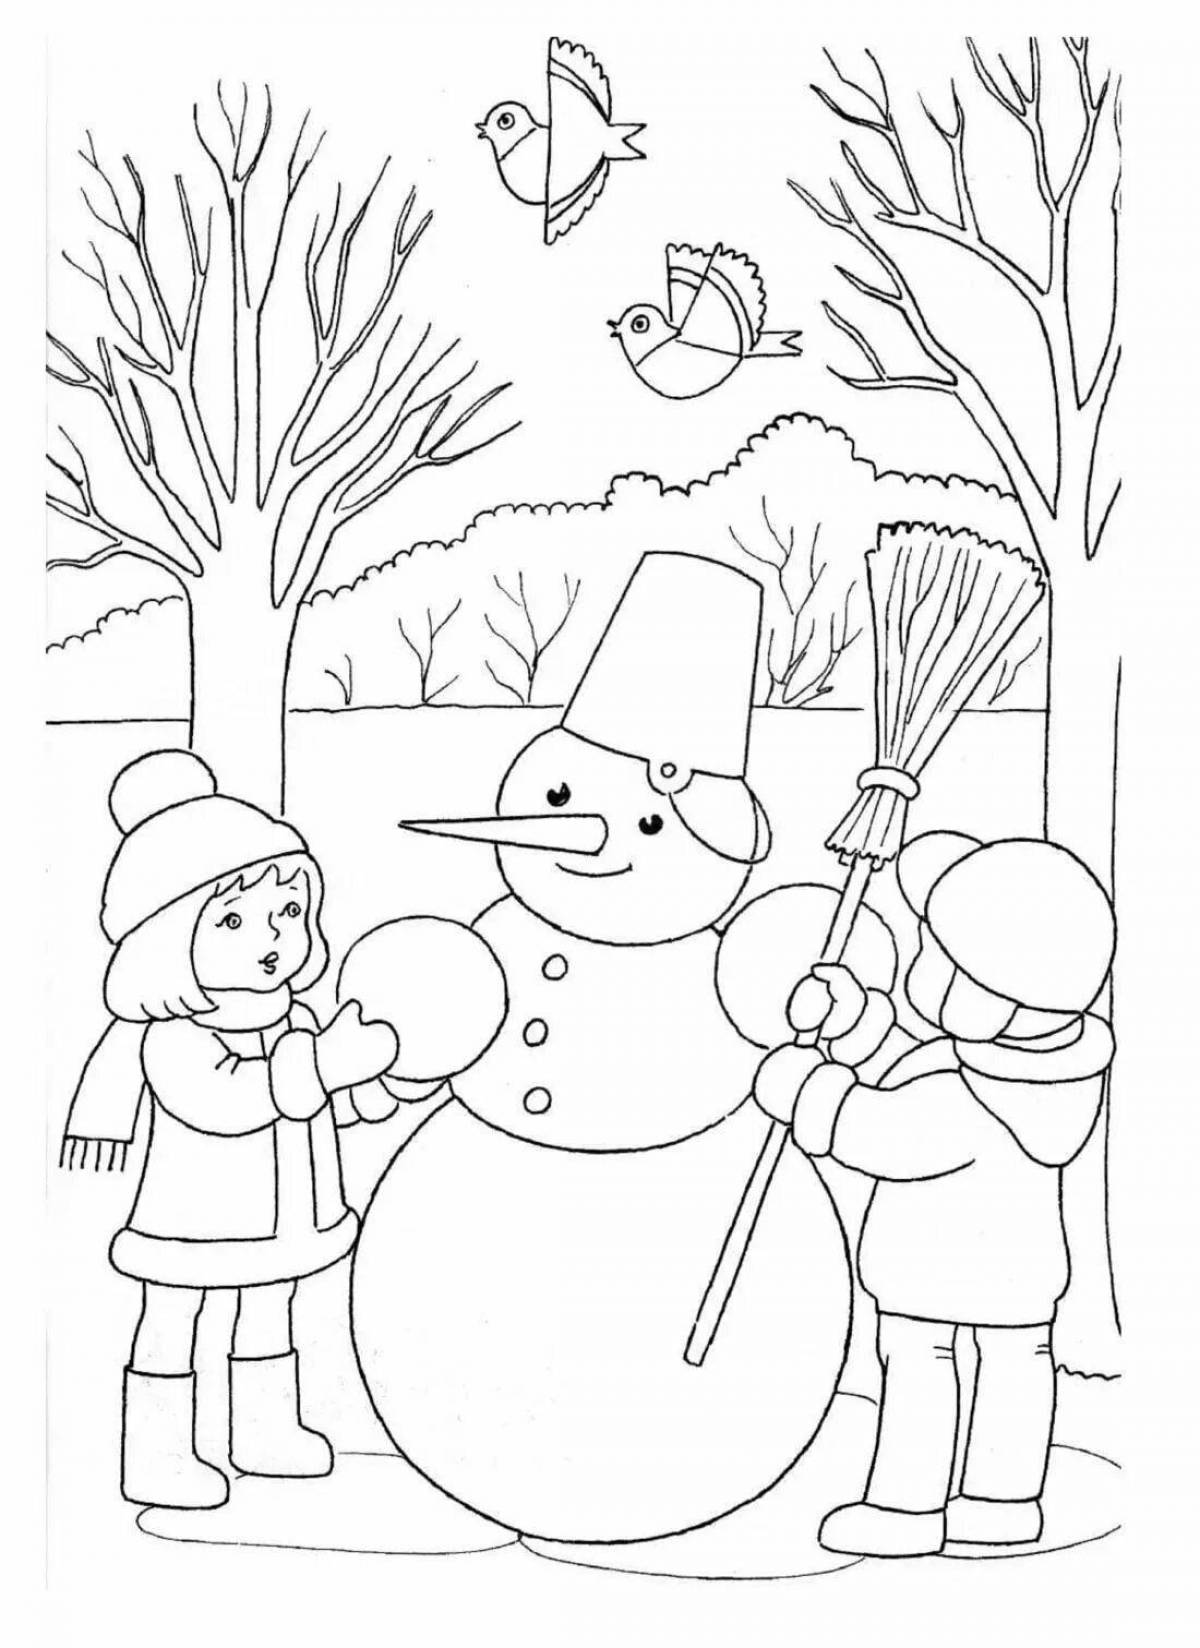 A fun January coloring book for kids 6-7 years old